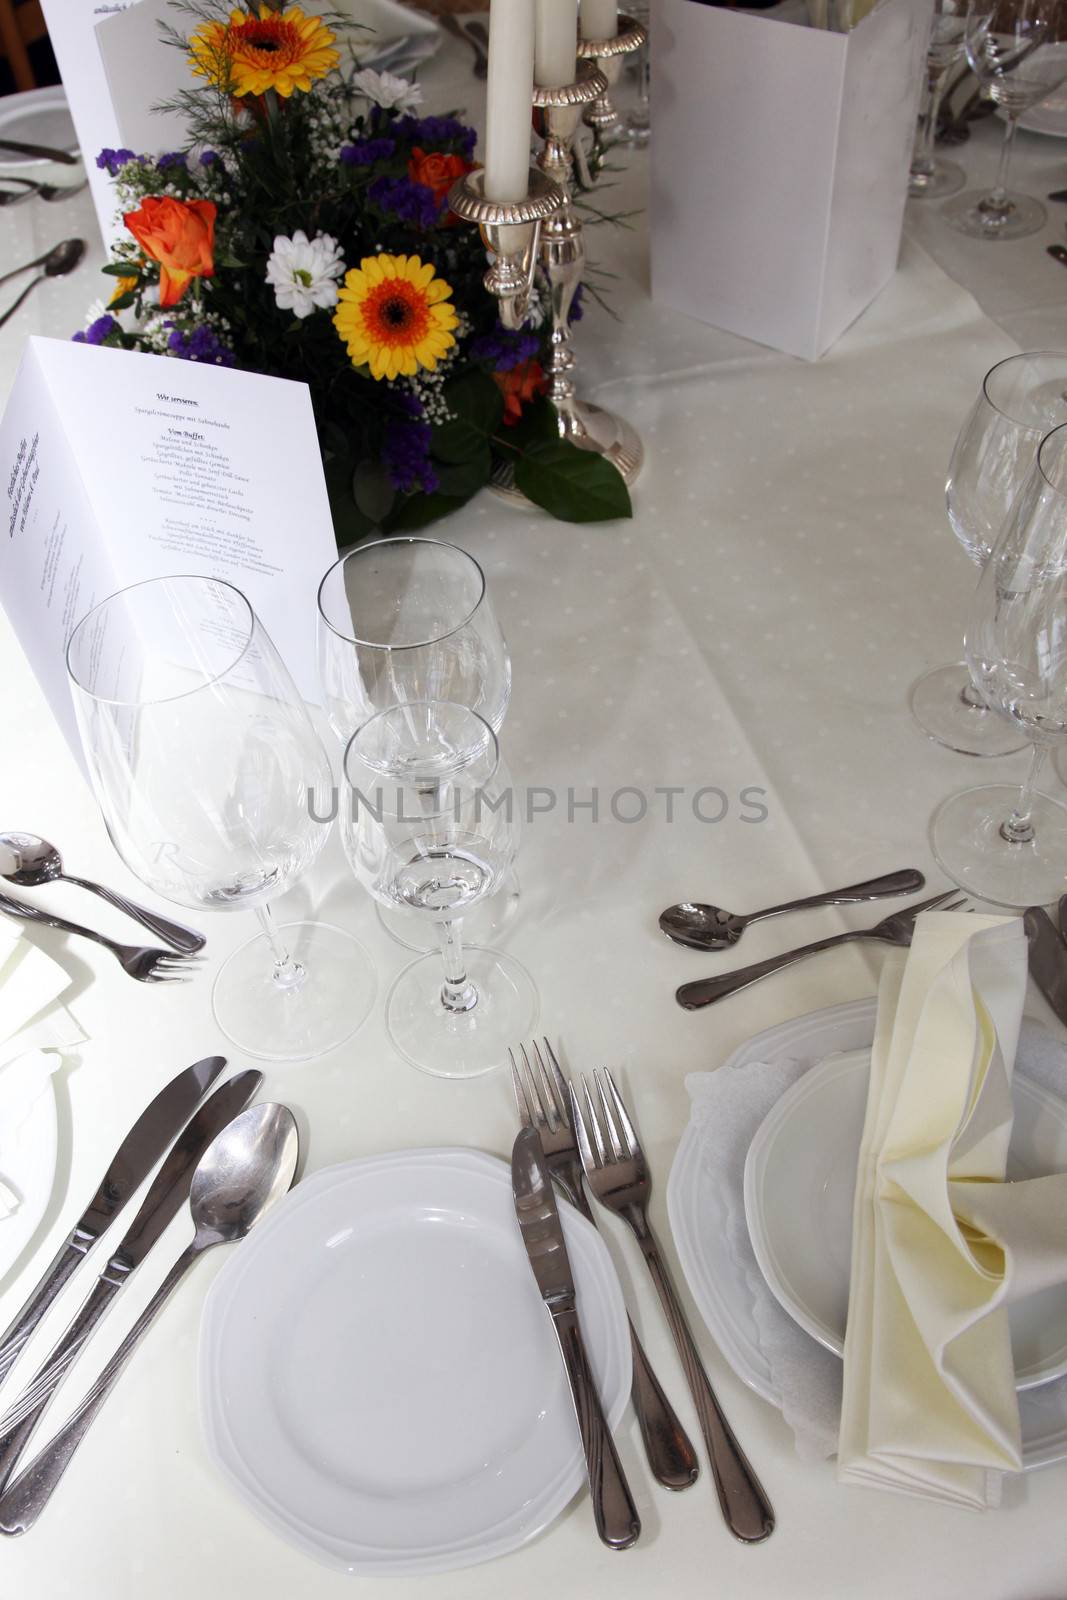 Formal table setting by Farina6000